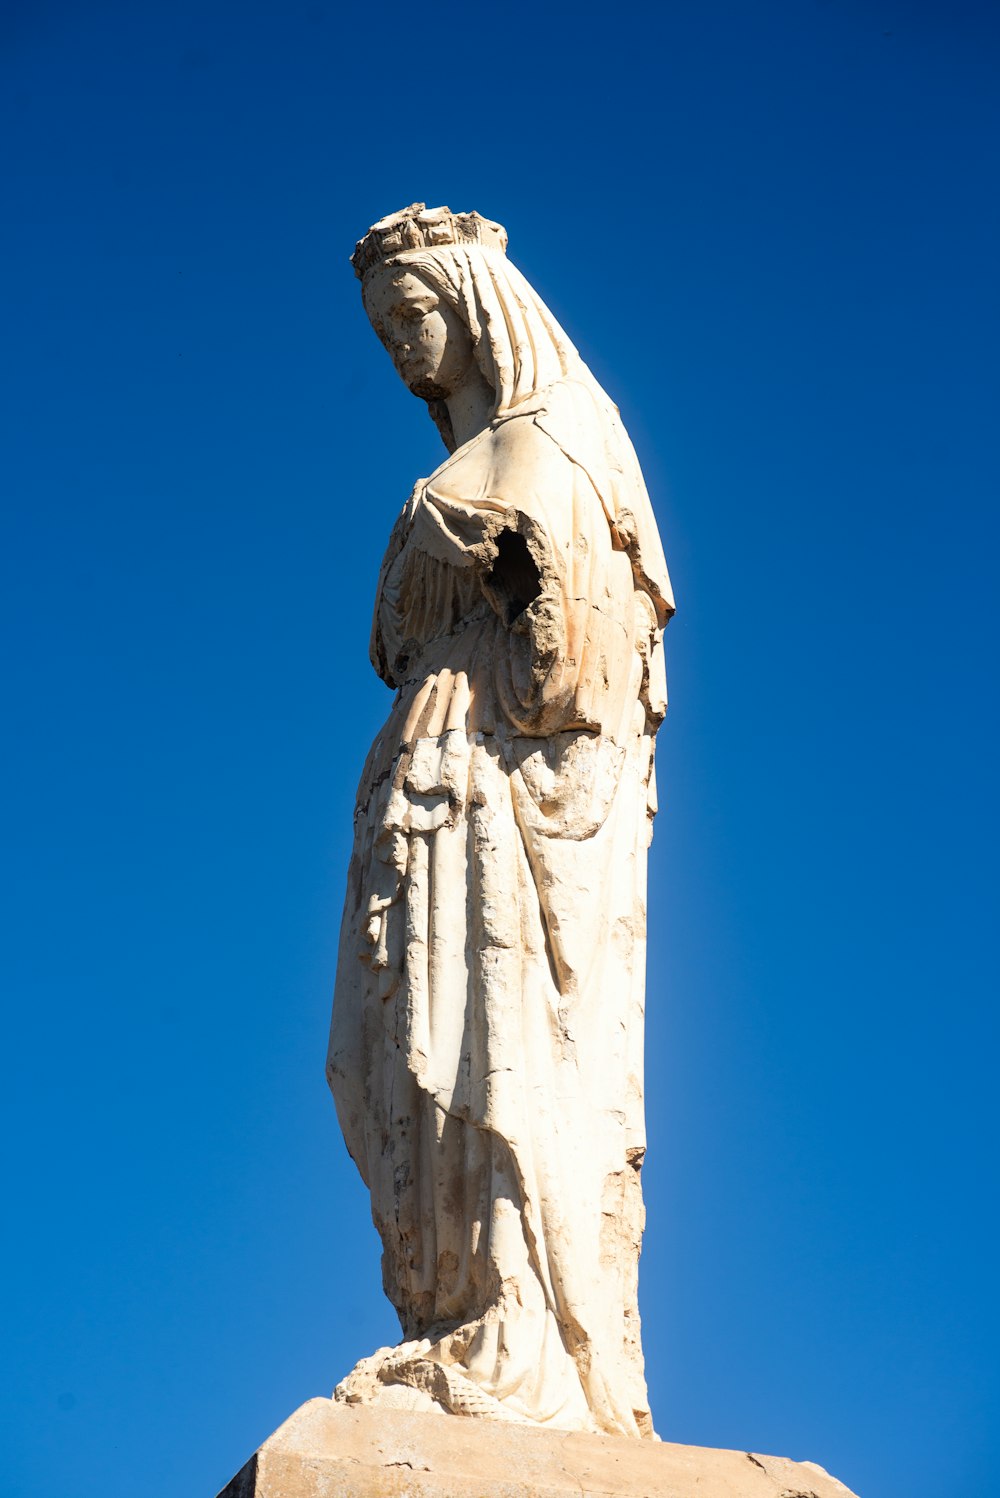 a statue of a person holding a cross on top of a hill